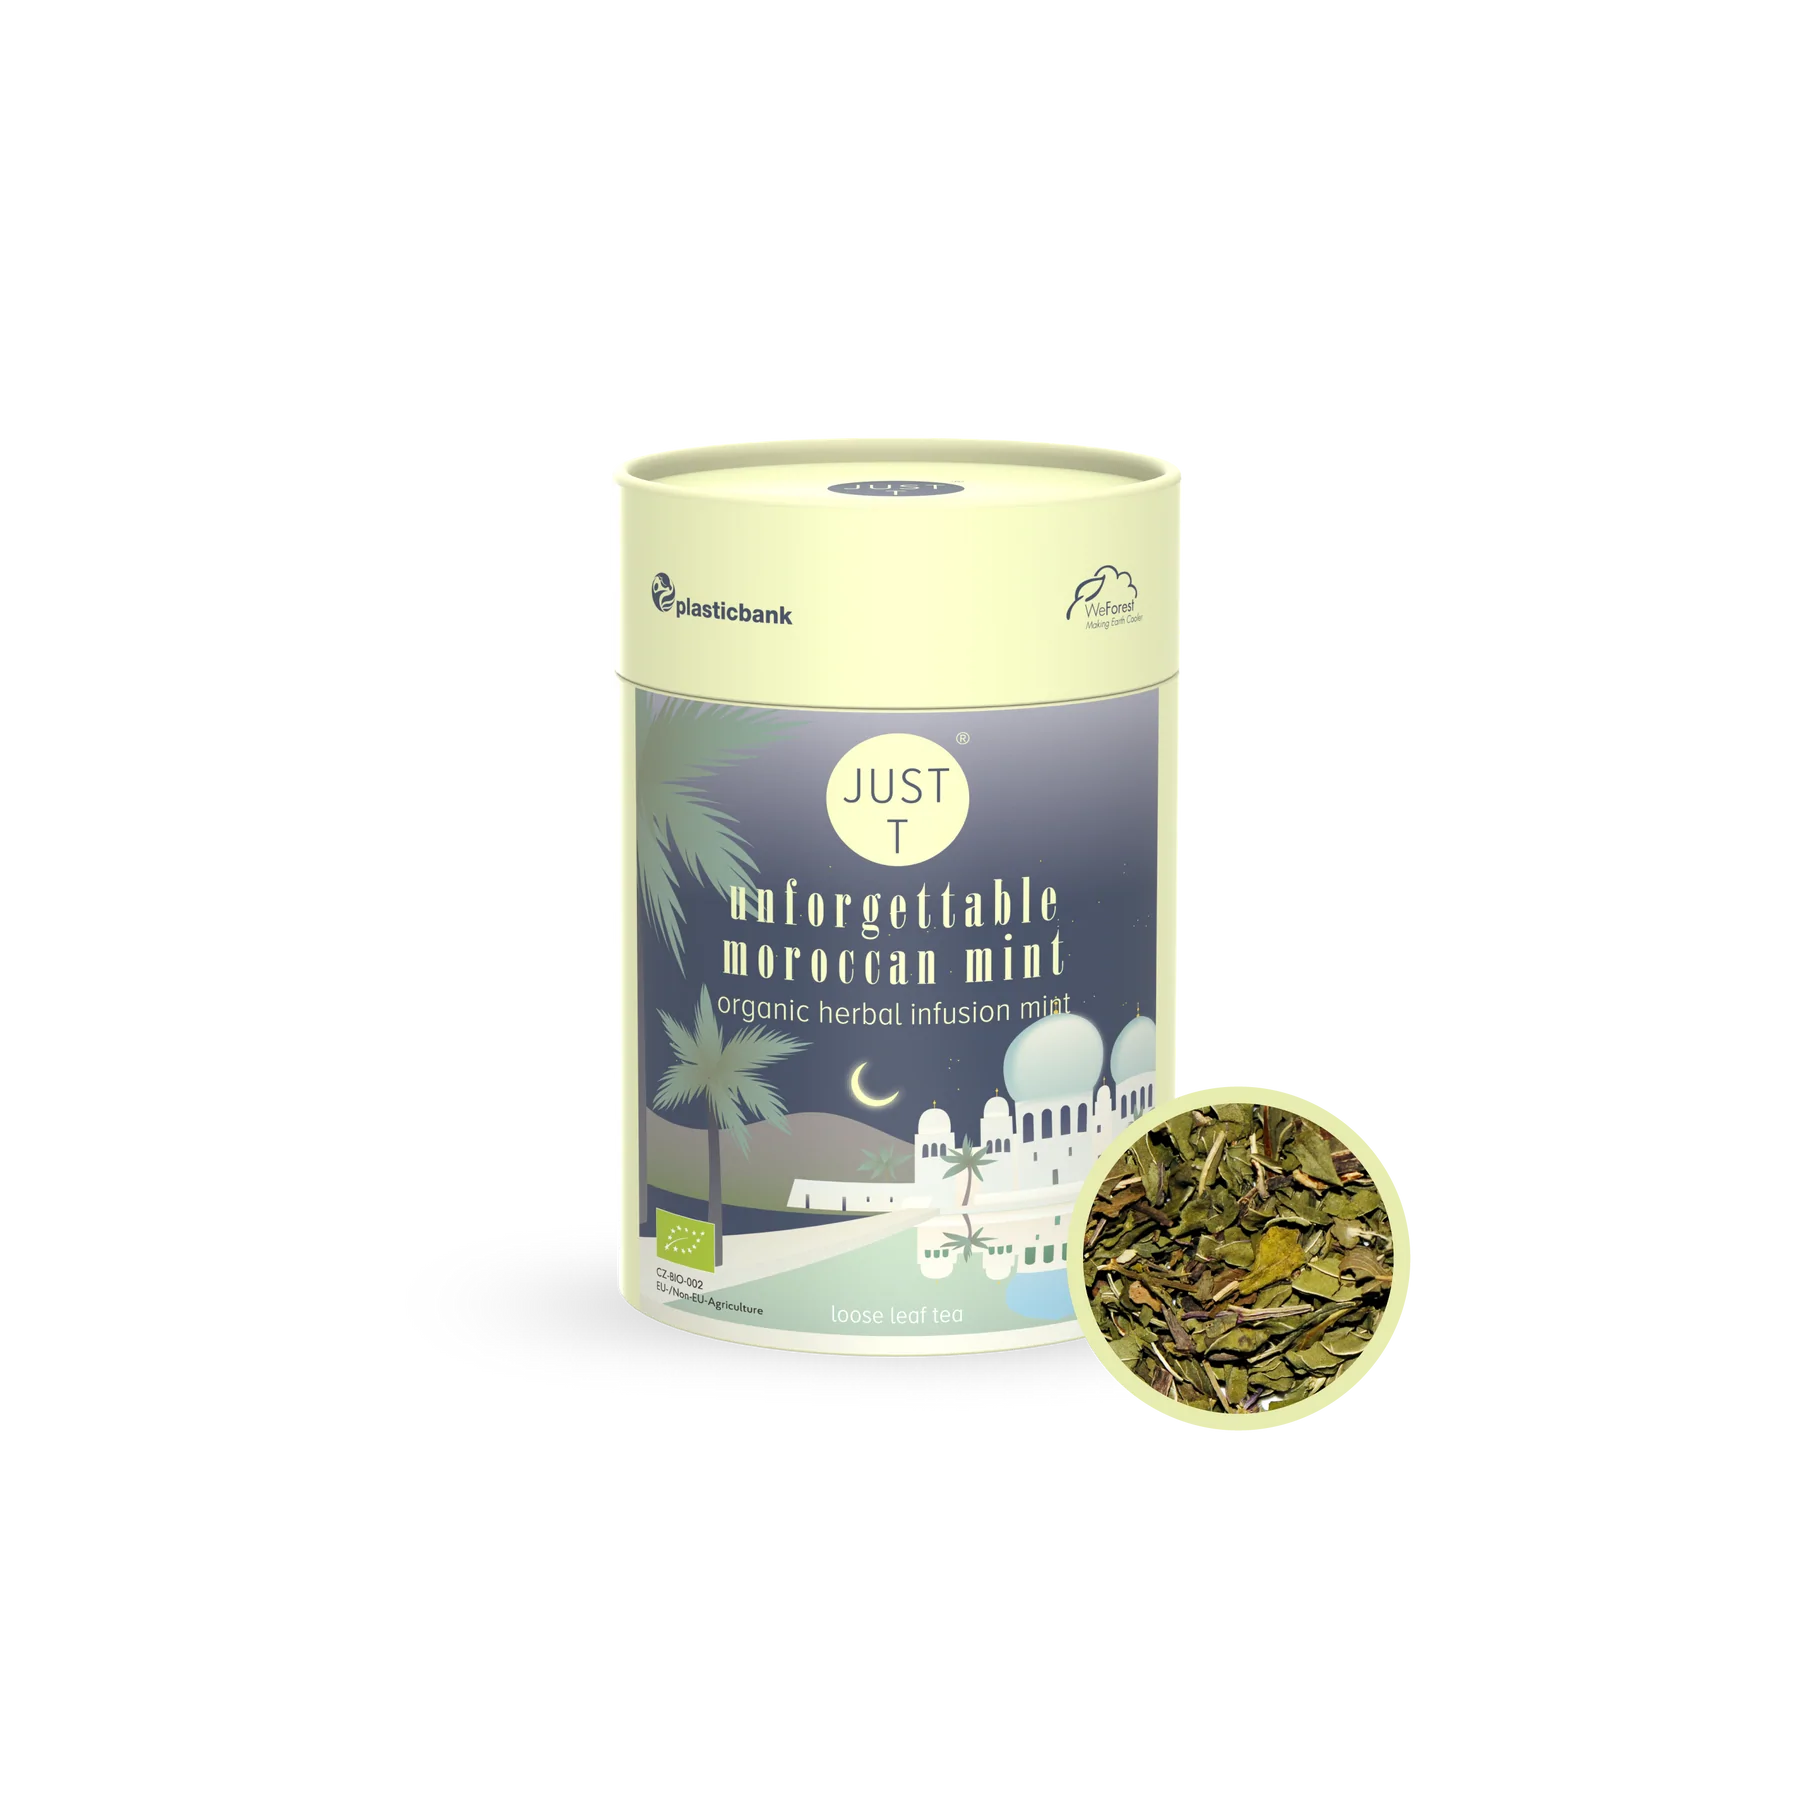 JUST-T Unforgettable Moroccan Mint taimetee 80g